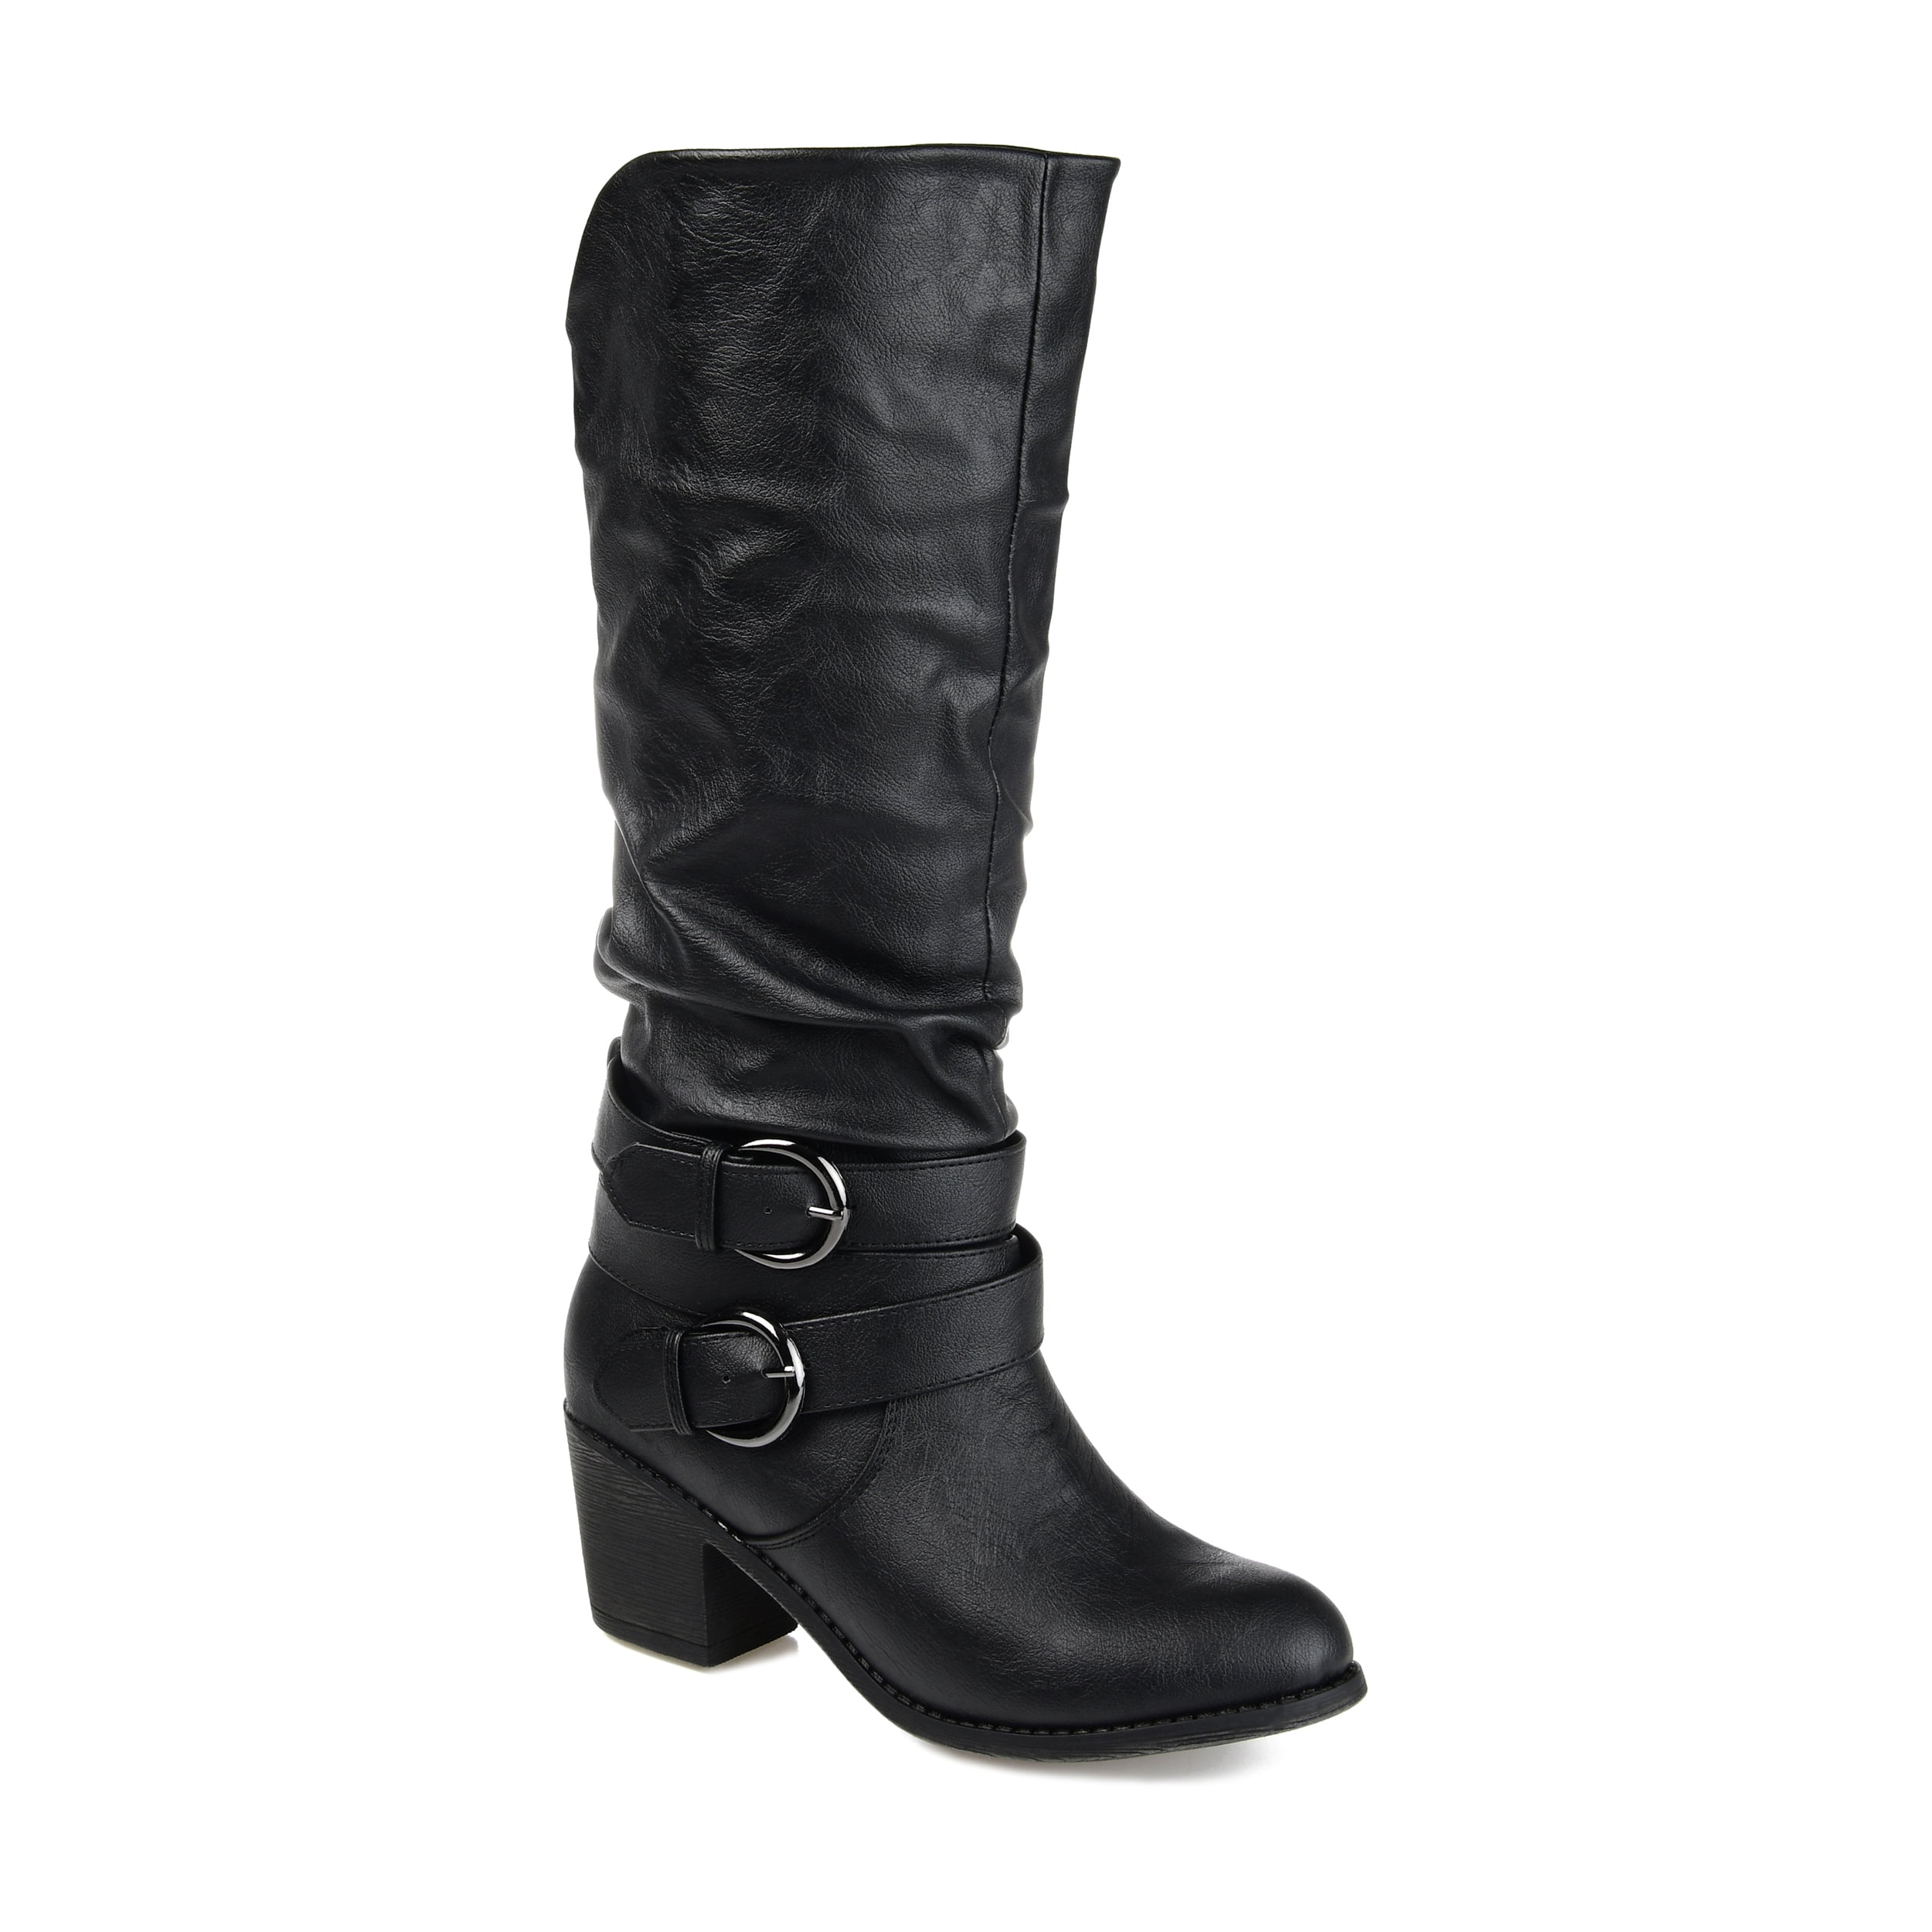 Details about   MILWAUKEE PERFORMANCE WOMENS PLATFORM HEEL SLOUCH SHAFT BUCKLED BOOTS SAER